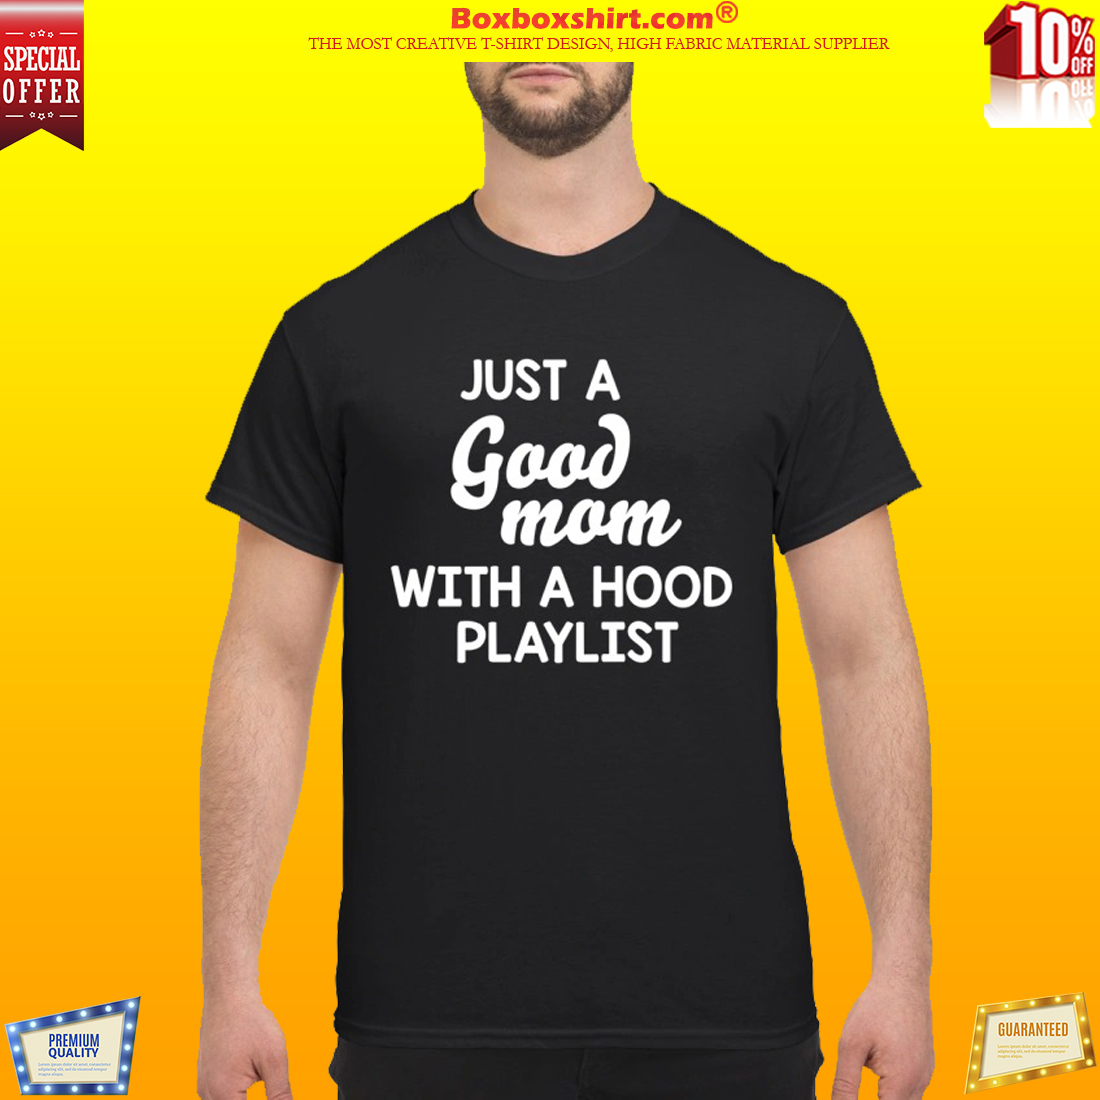 Just a good mom with a hood playlist classic shirt